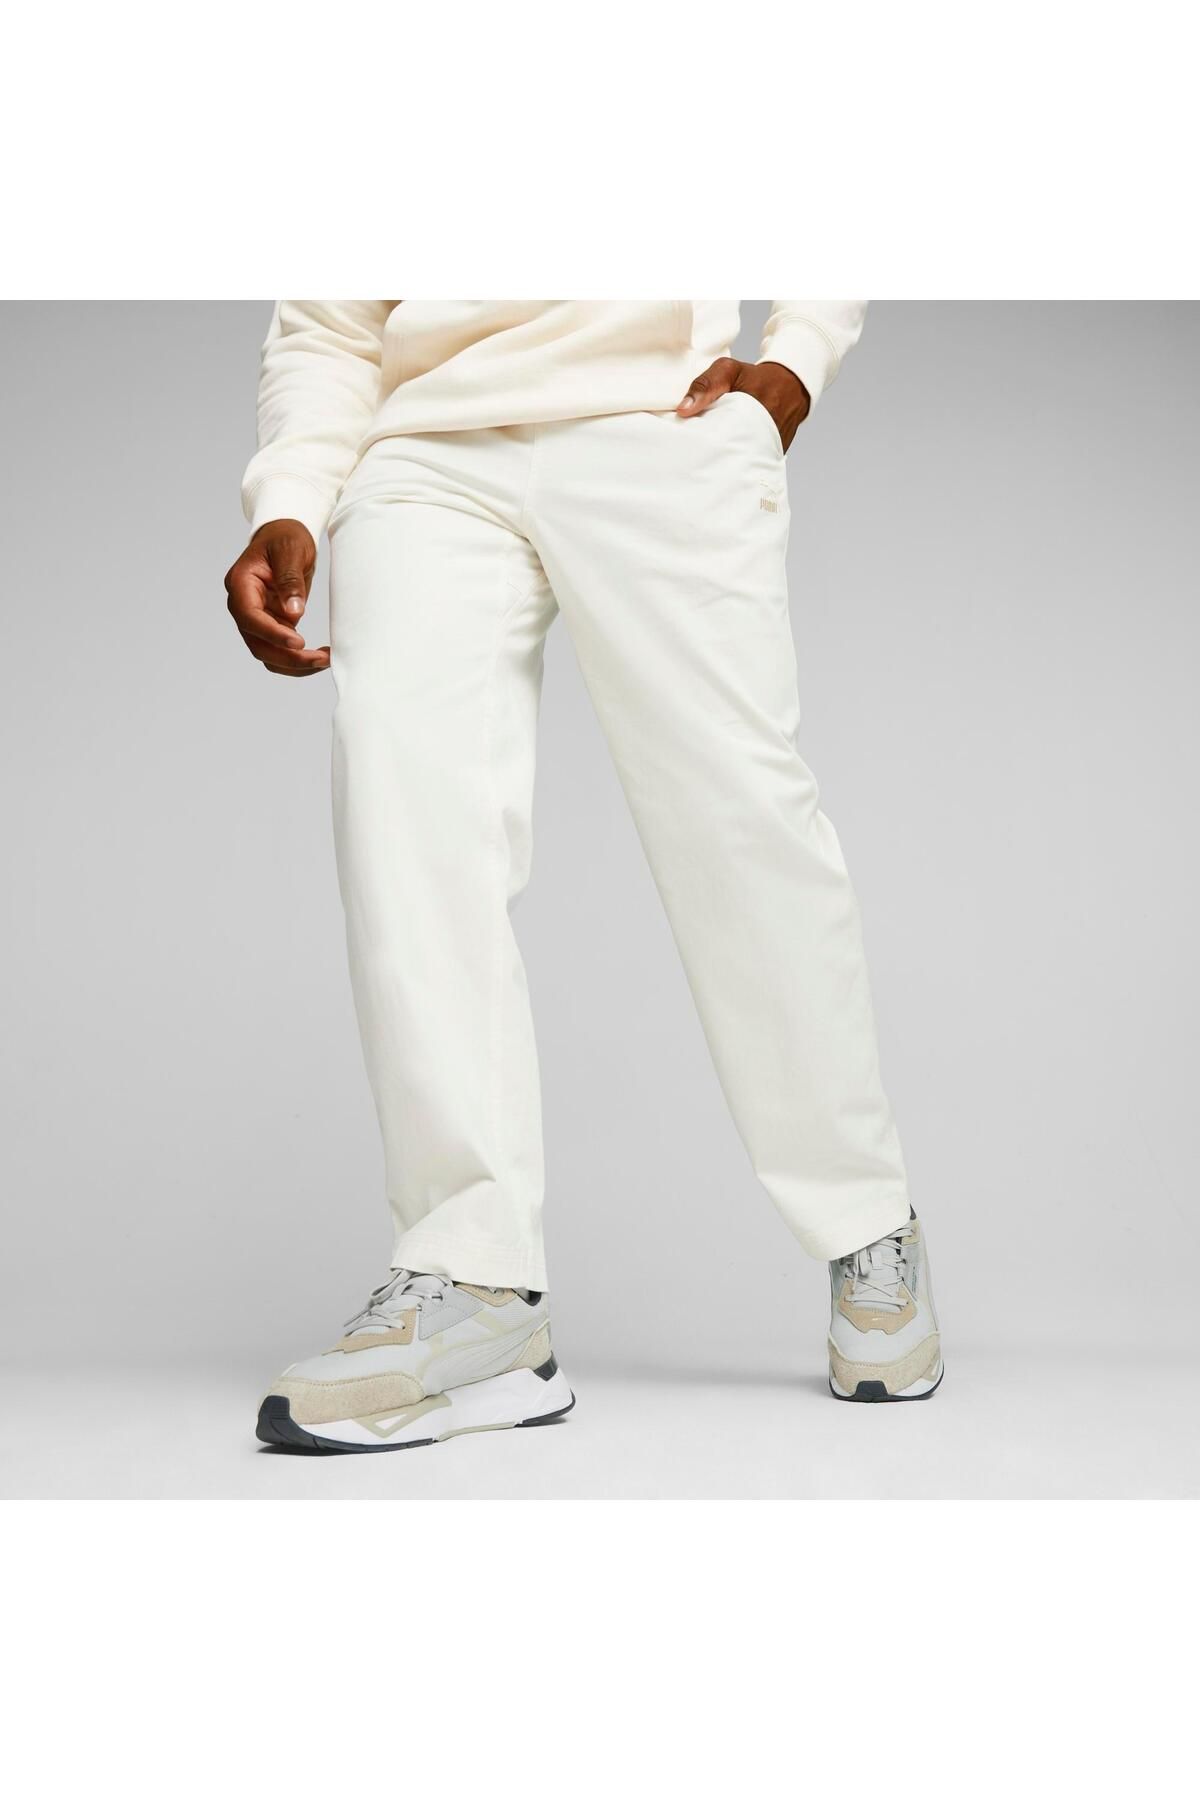 Puma BETTER CLASSICS Woven Pant Frosted Ivory